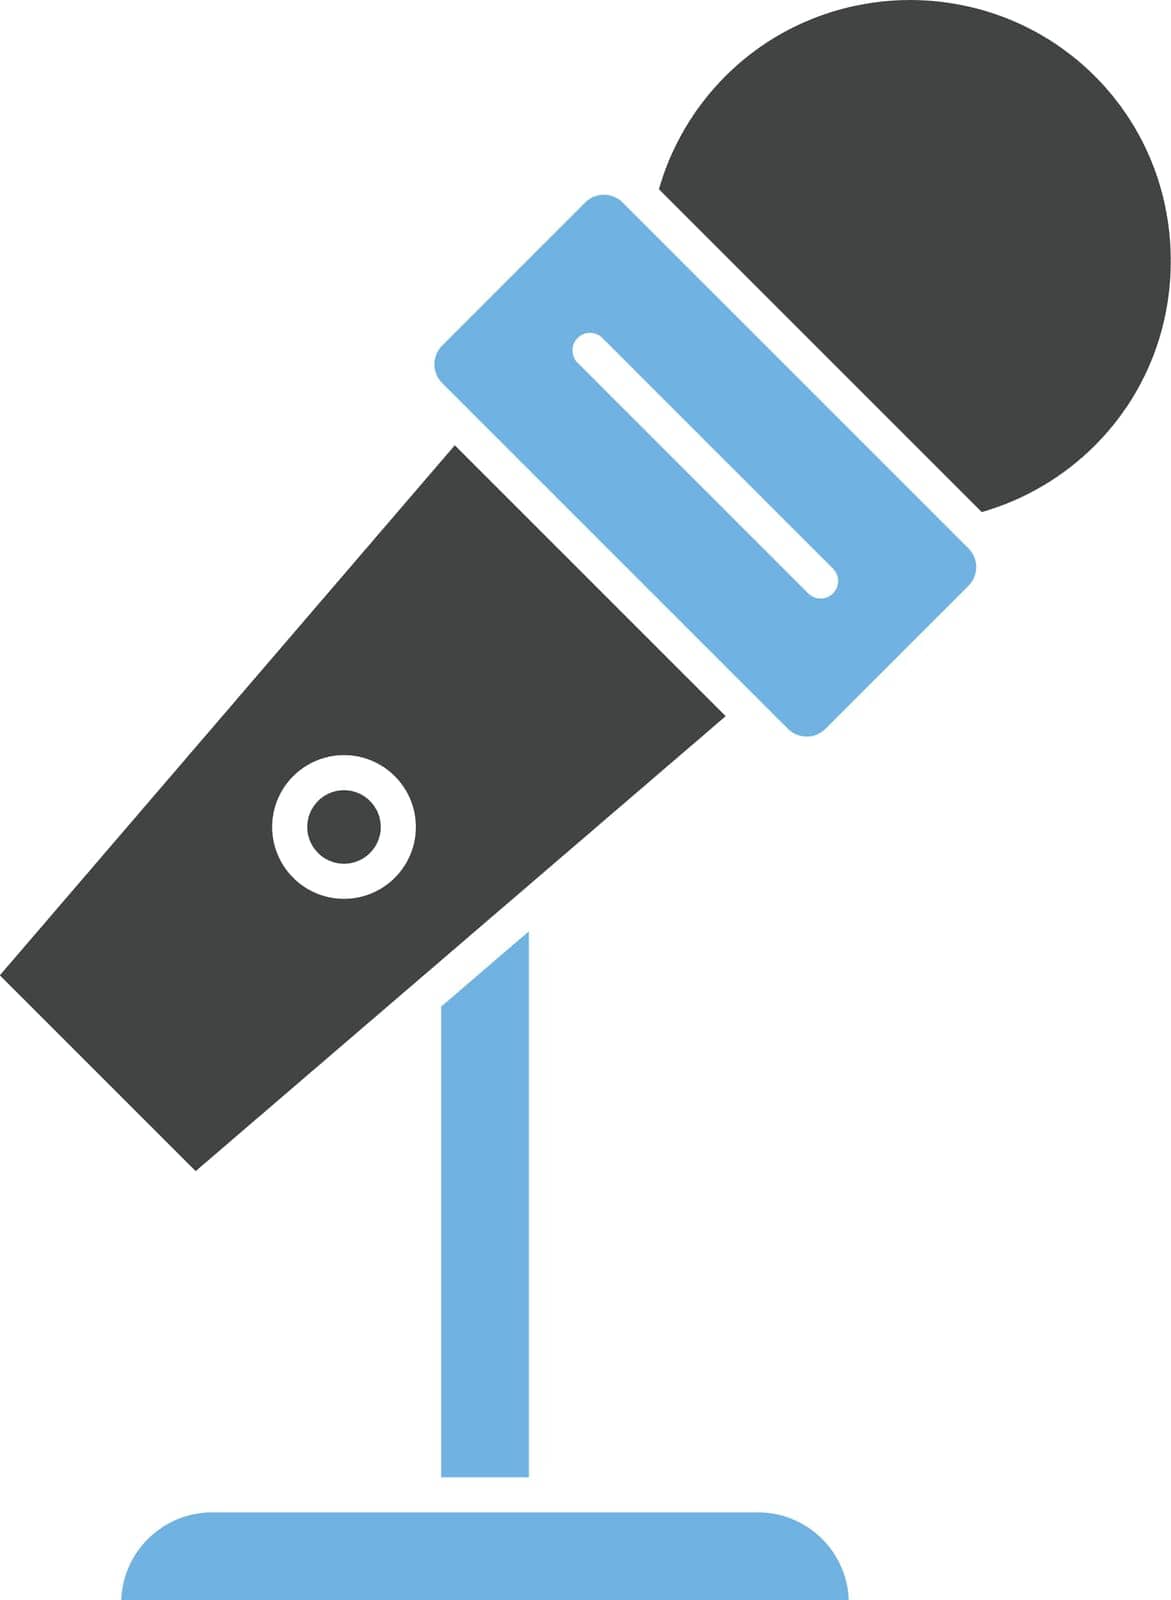 Mic Stand icon vector image. Suitable for mobile application web application and print media.